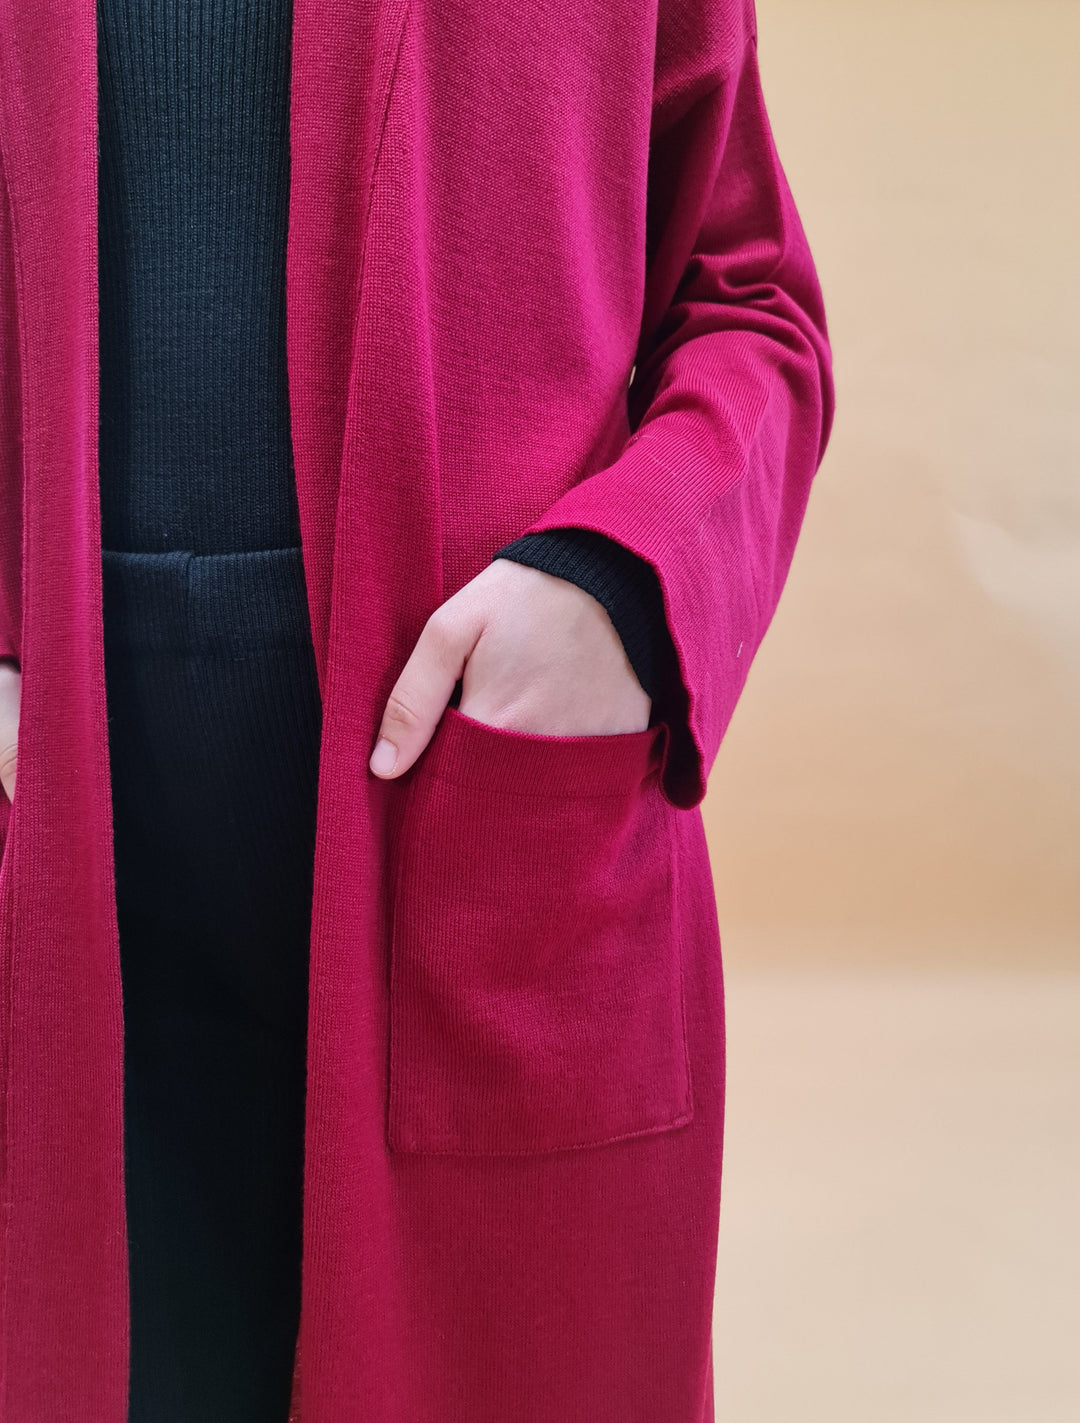 Close-up of a person wearing a long, red cardigan with their hands in the pockets against a neutral background